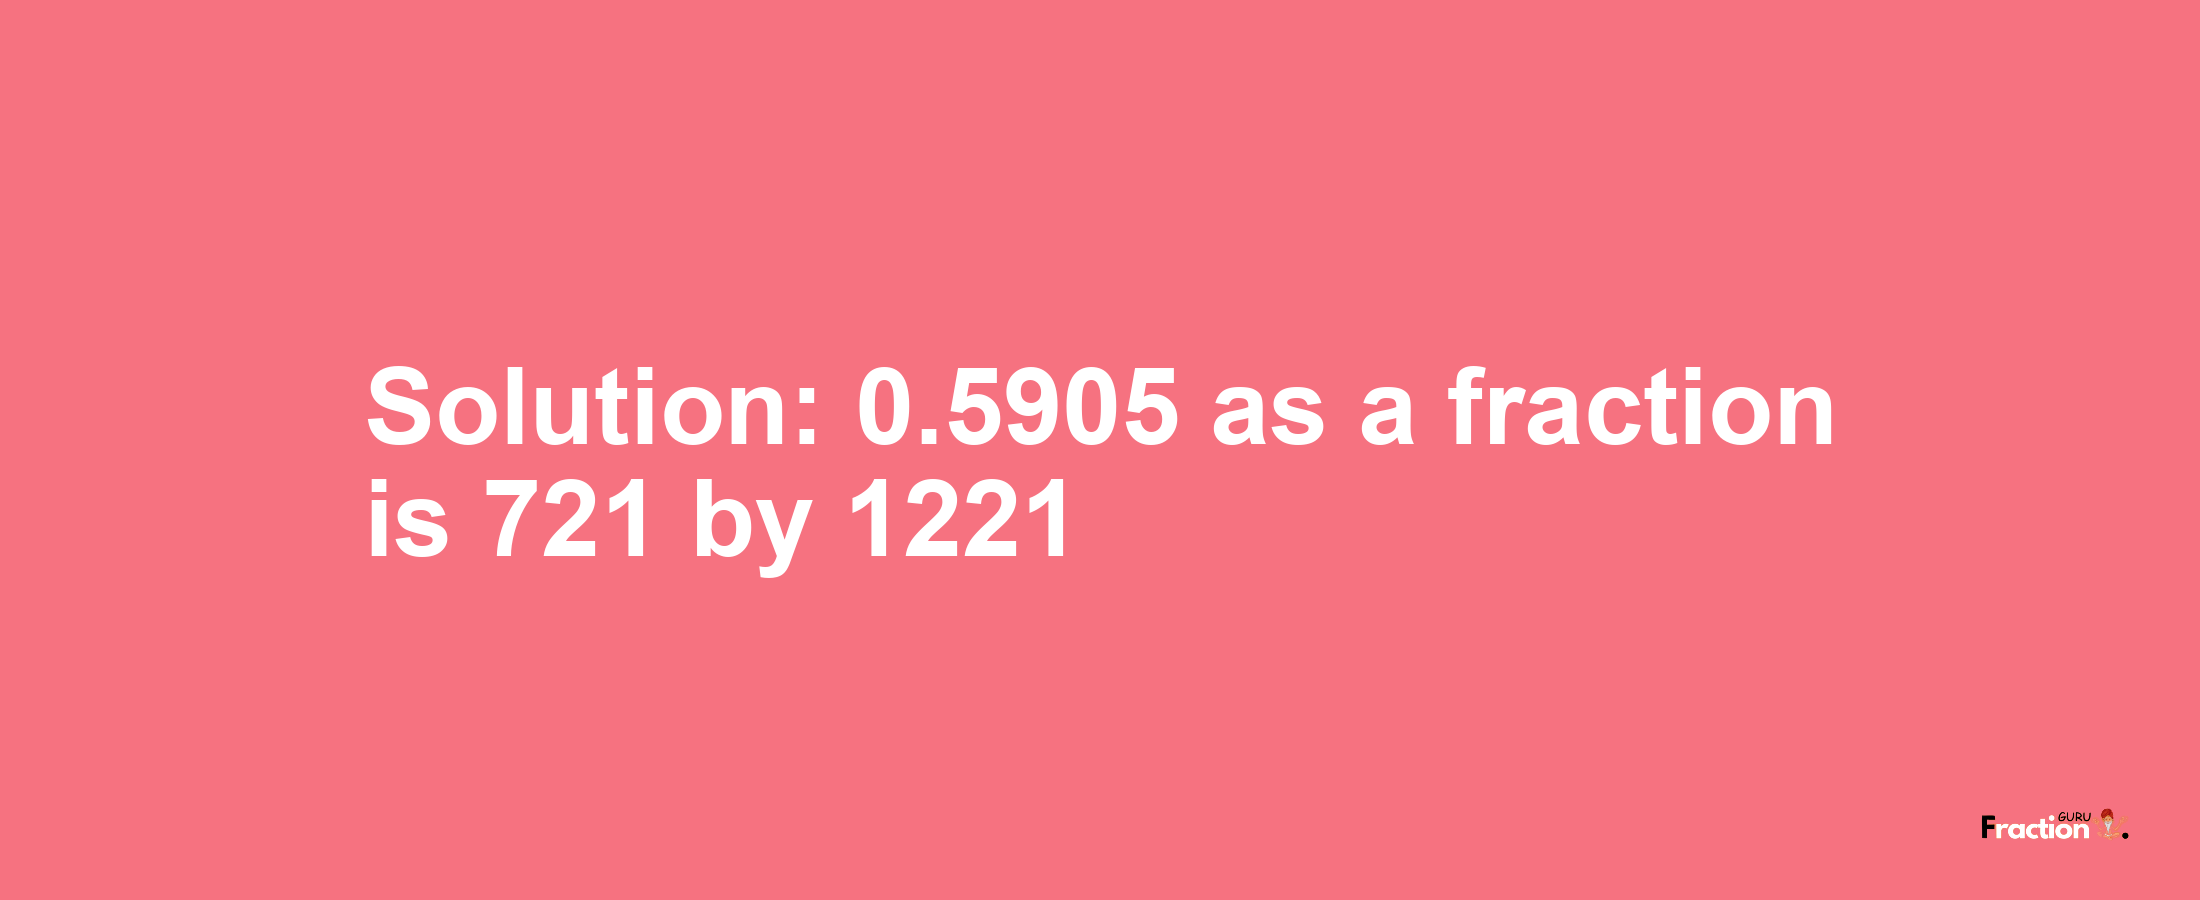 Solution:0.5905 as a fraction is 721/1221